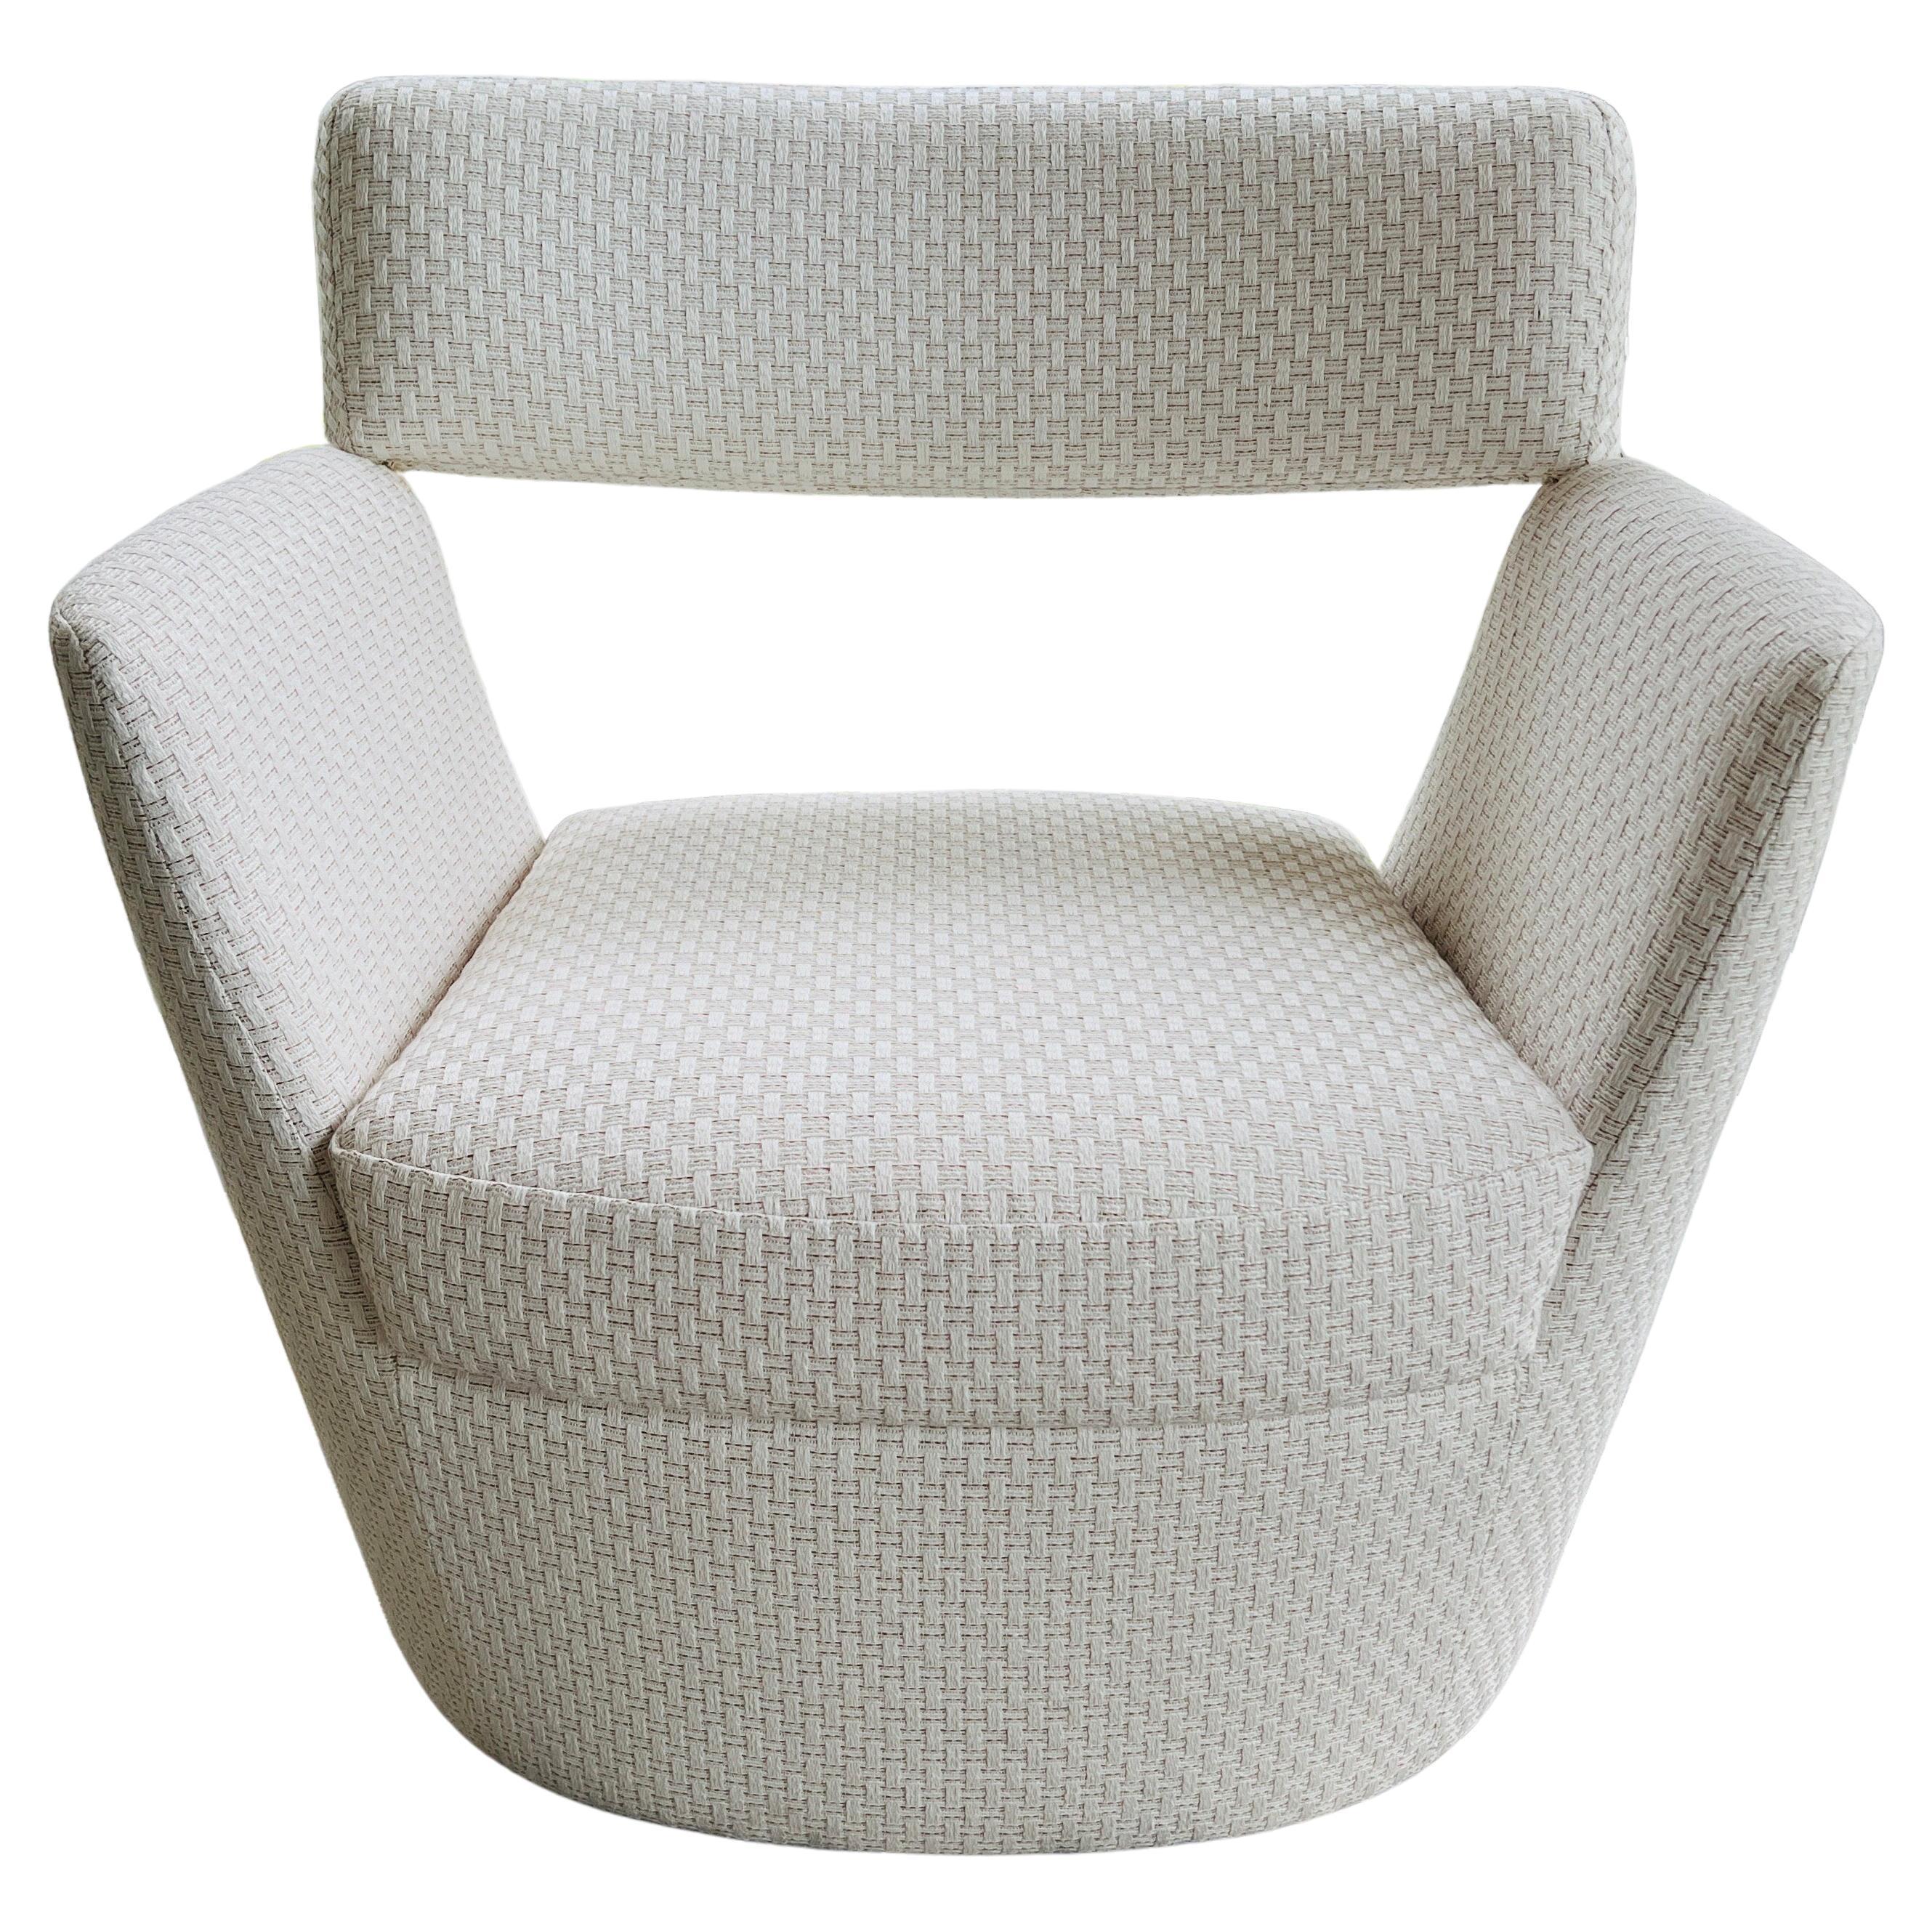 Modernist Lounge Chair in Woven Ivory Fabric by Pierre Frey